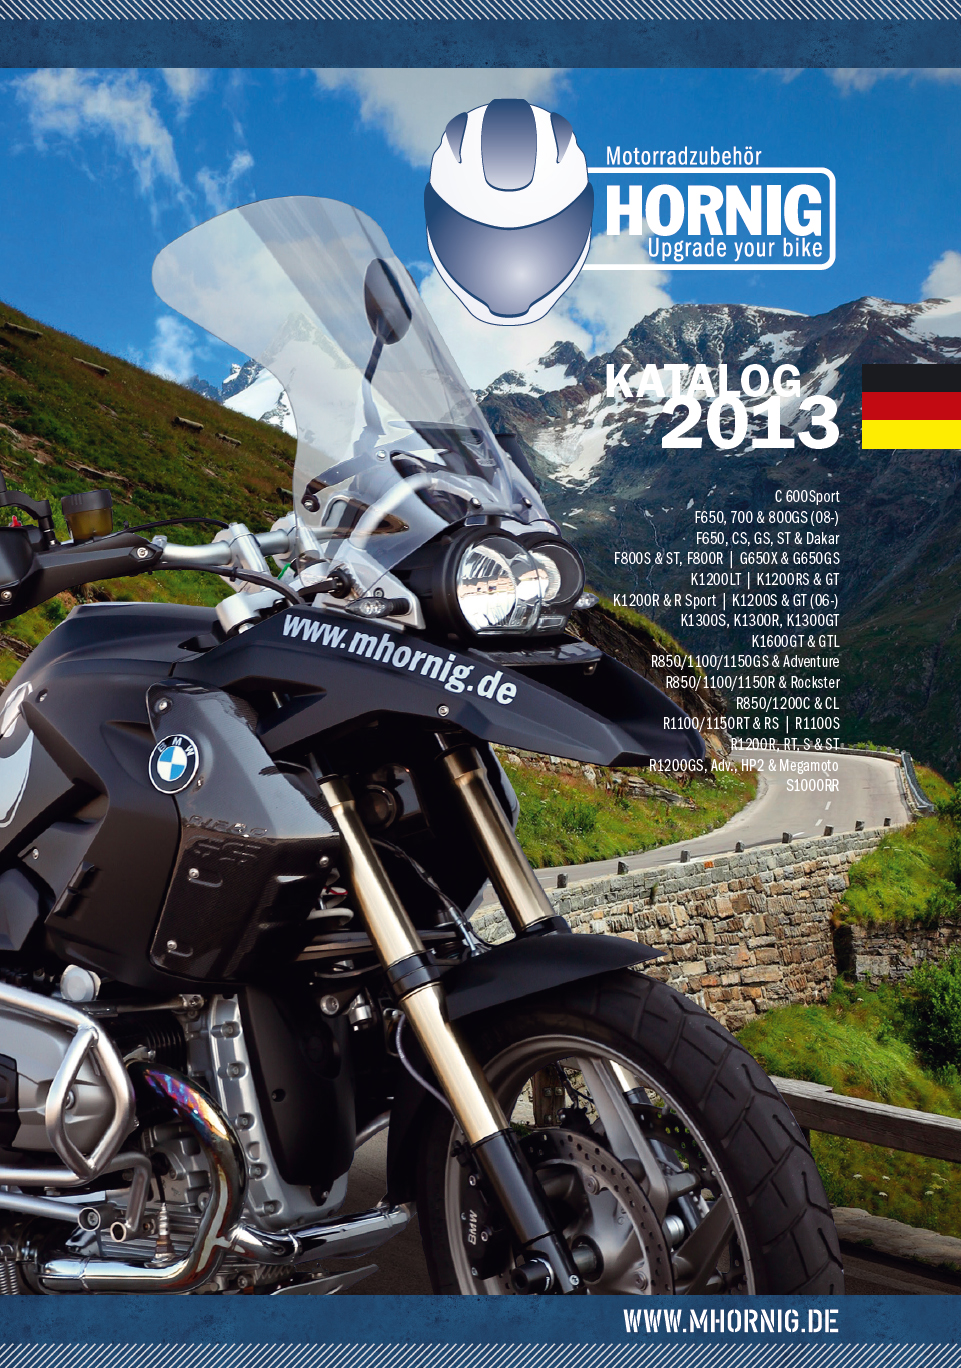 BMW Motorcycle Accessory Catalogue 2013 by Hornig download or preorder